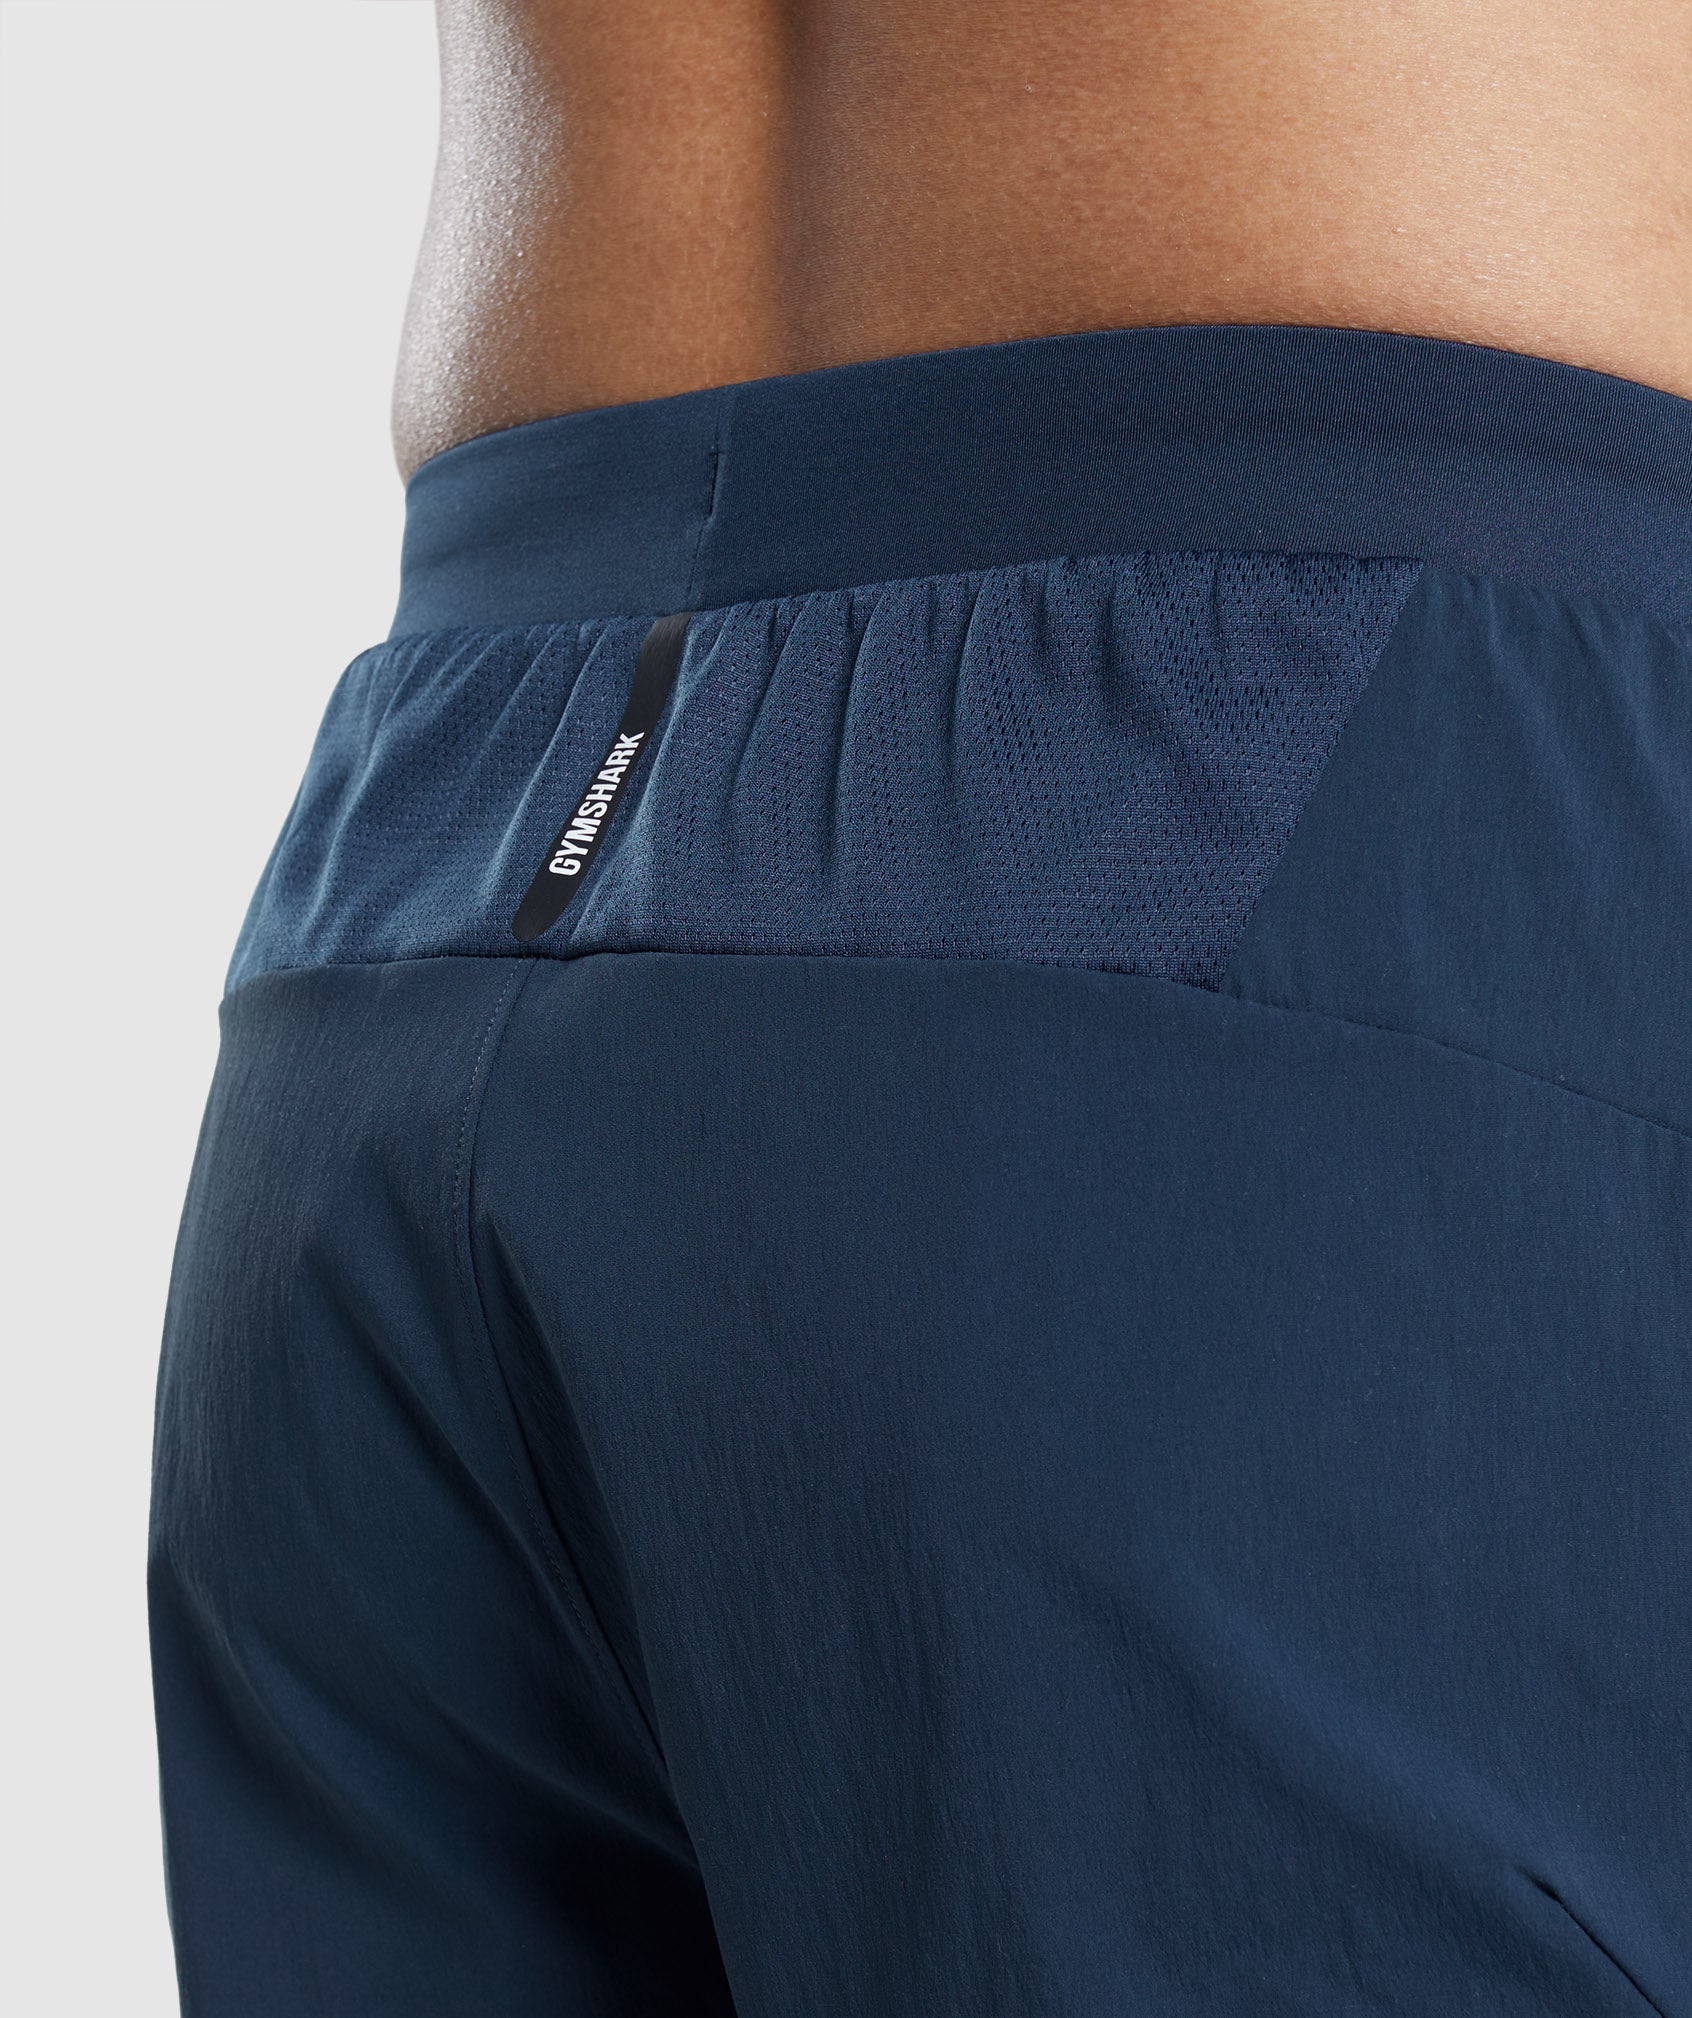 Speed Evolve 5" Shorts in Navy - view 5